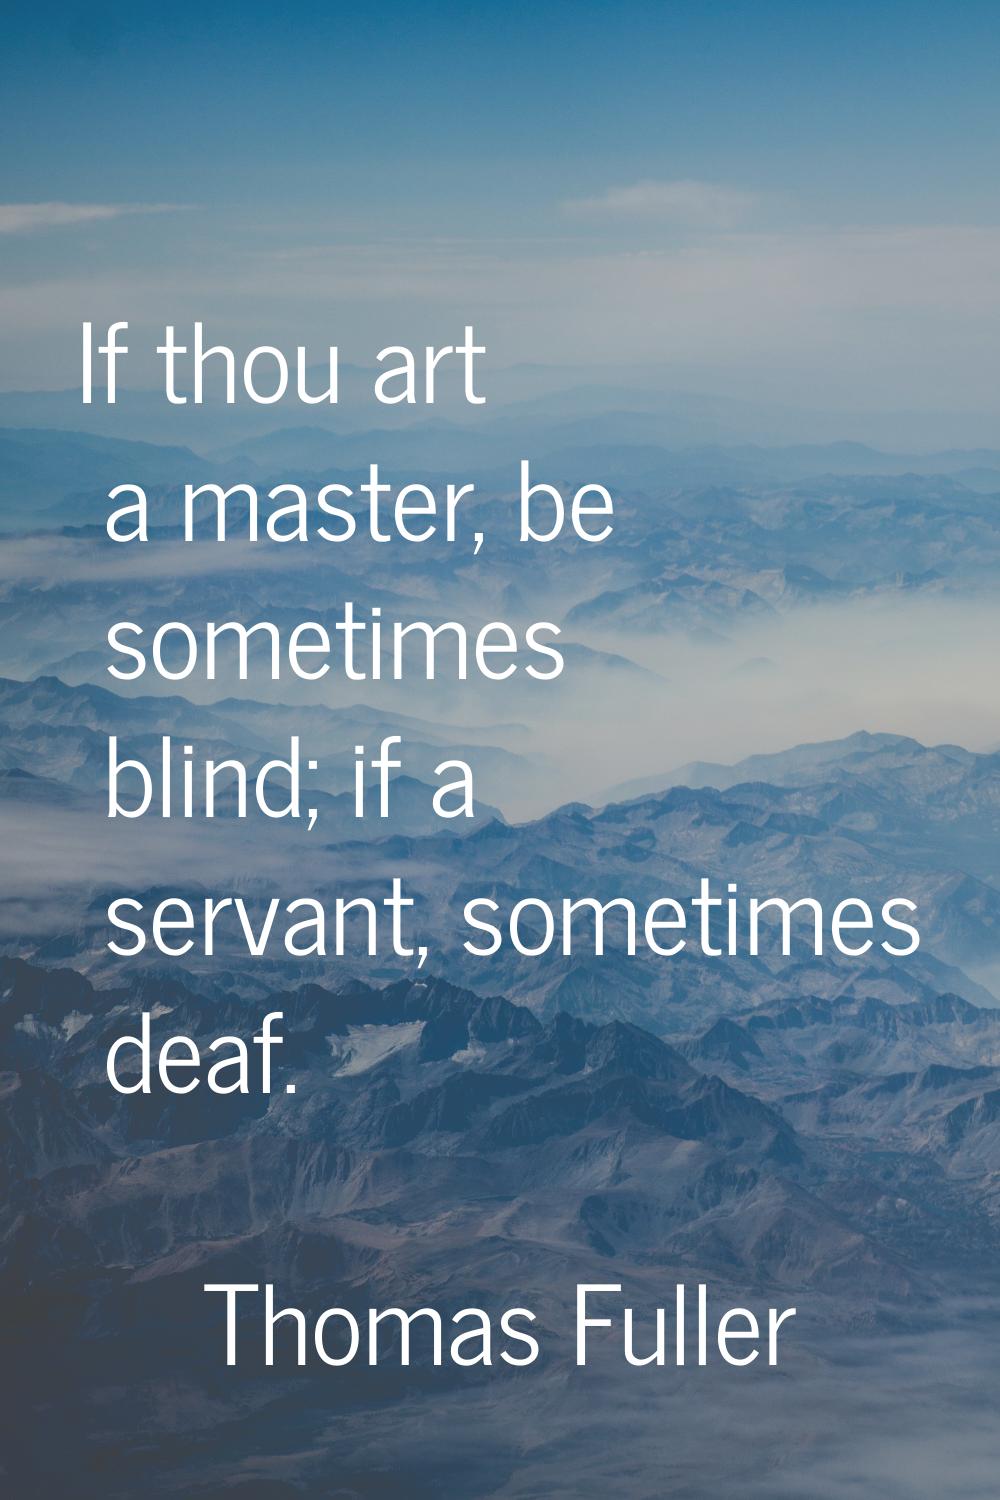 If thou art a master, be sometimes blind; if a servant, sometimes deaf.